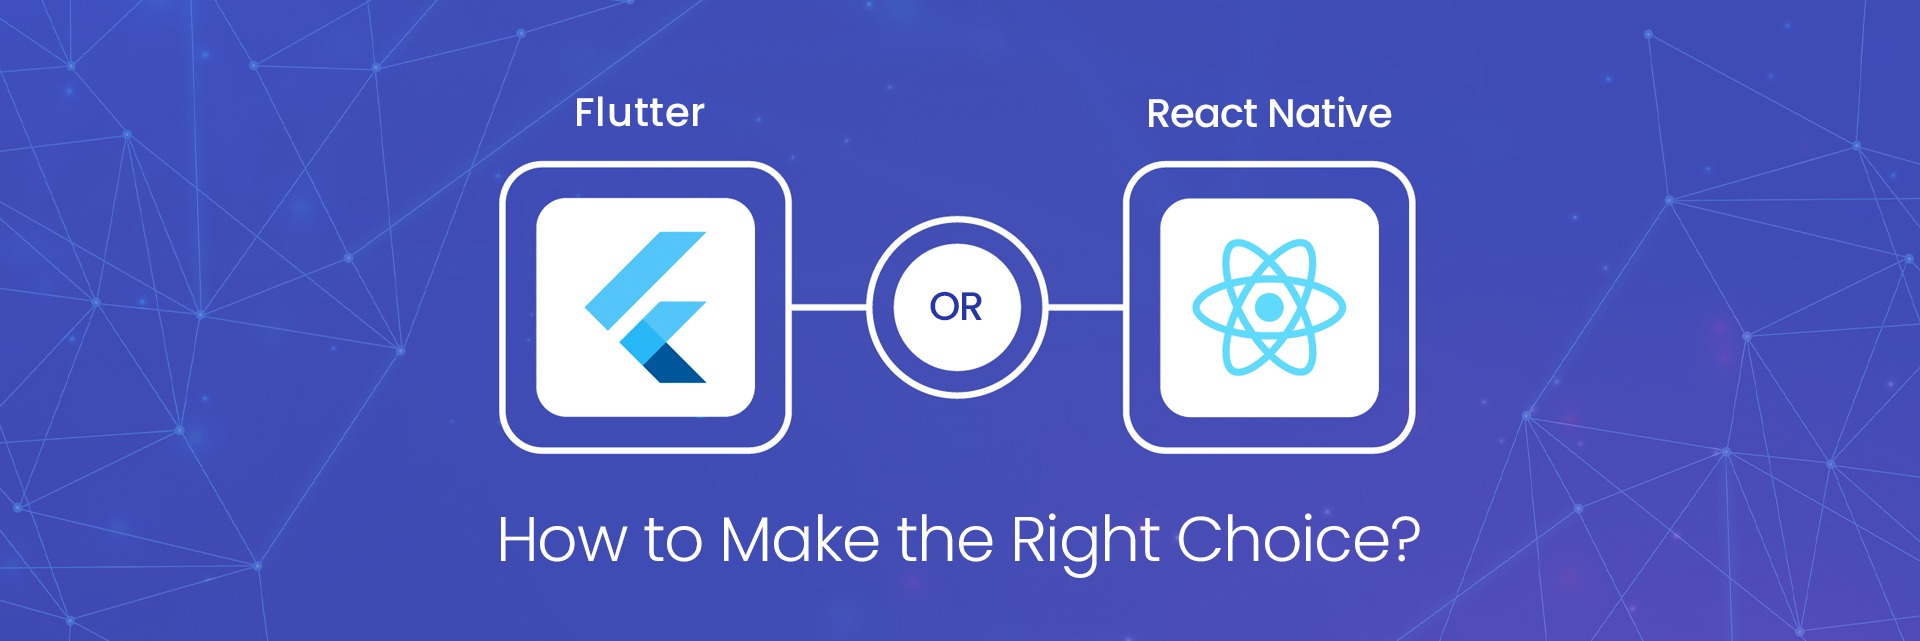 Flutter or React Native: How to Make the Right Choice